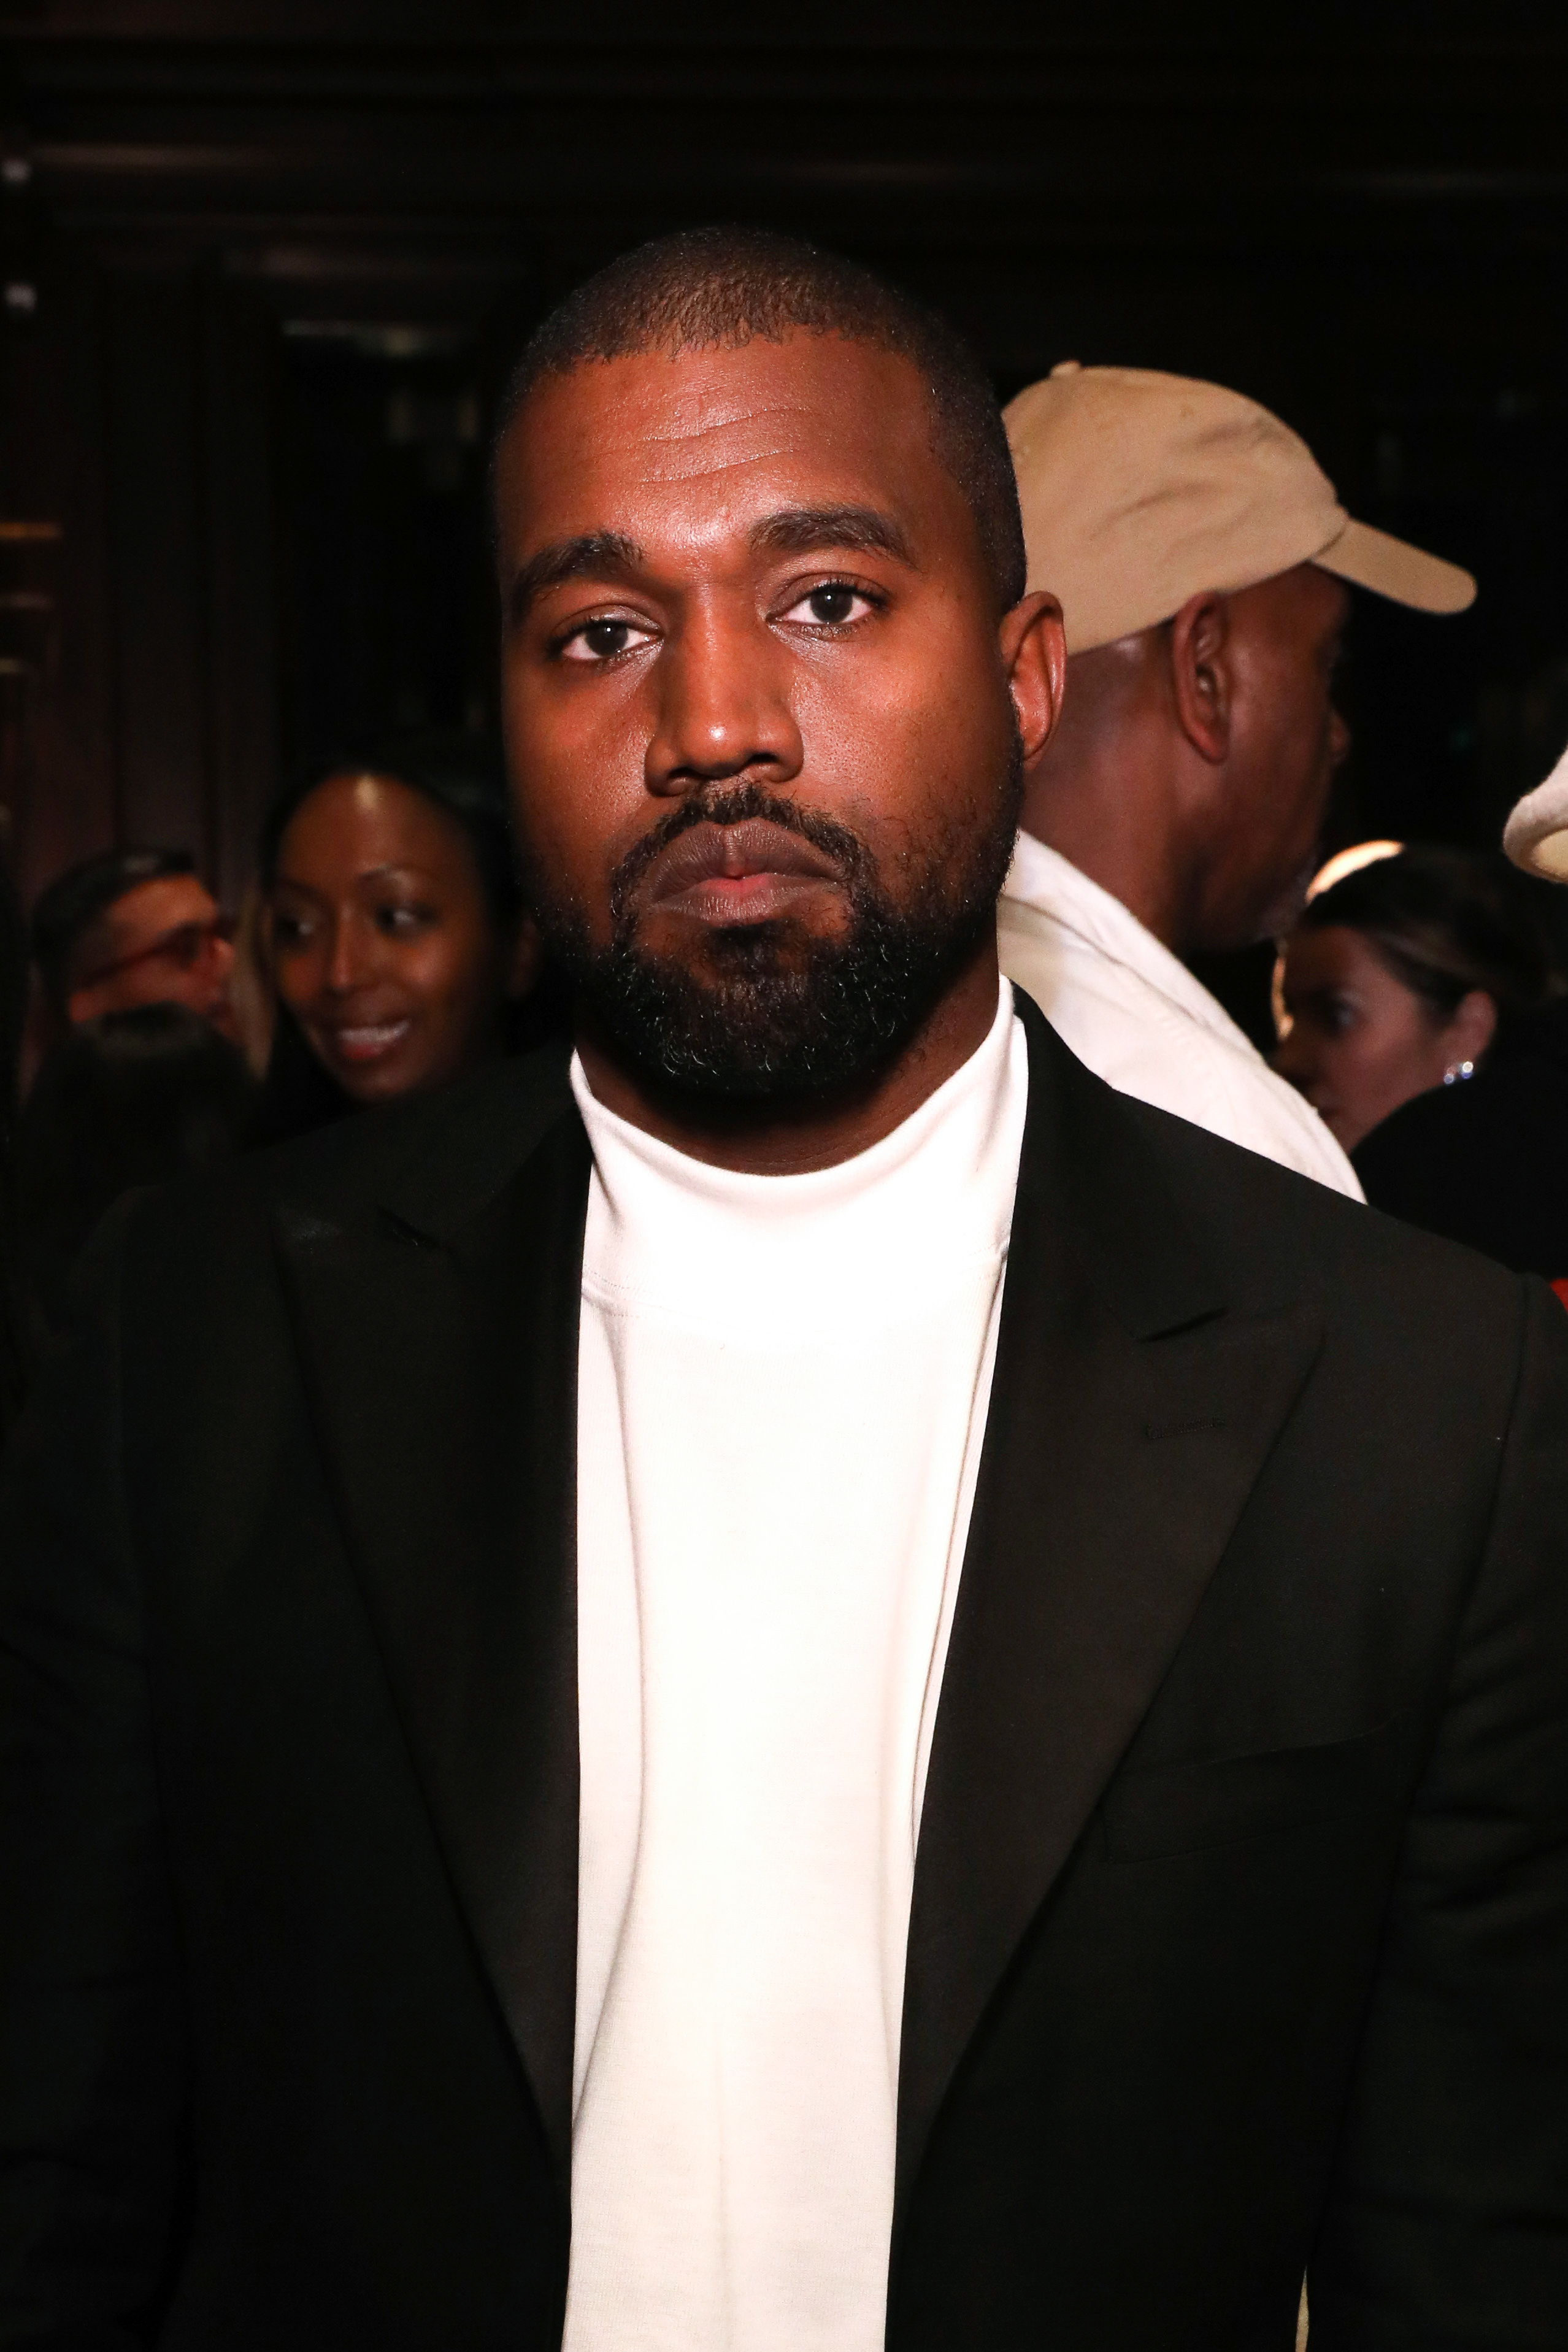 Representatives For Ye Deny Involvement In Skid Row Fashion Collaboration: “This Reported Event Is Not On Our Schedule”